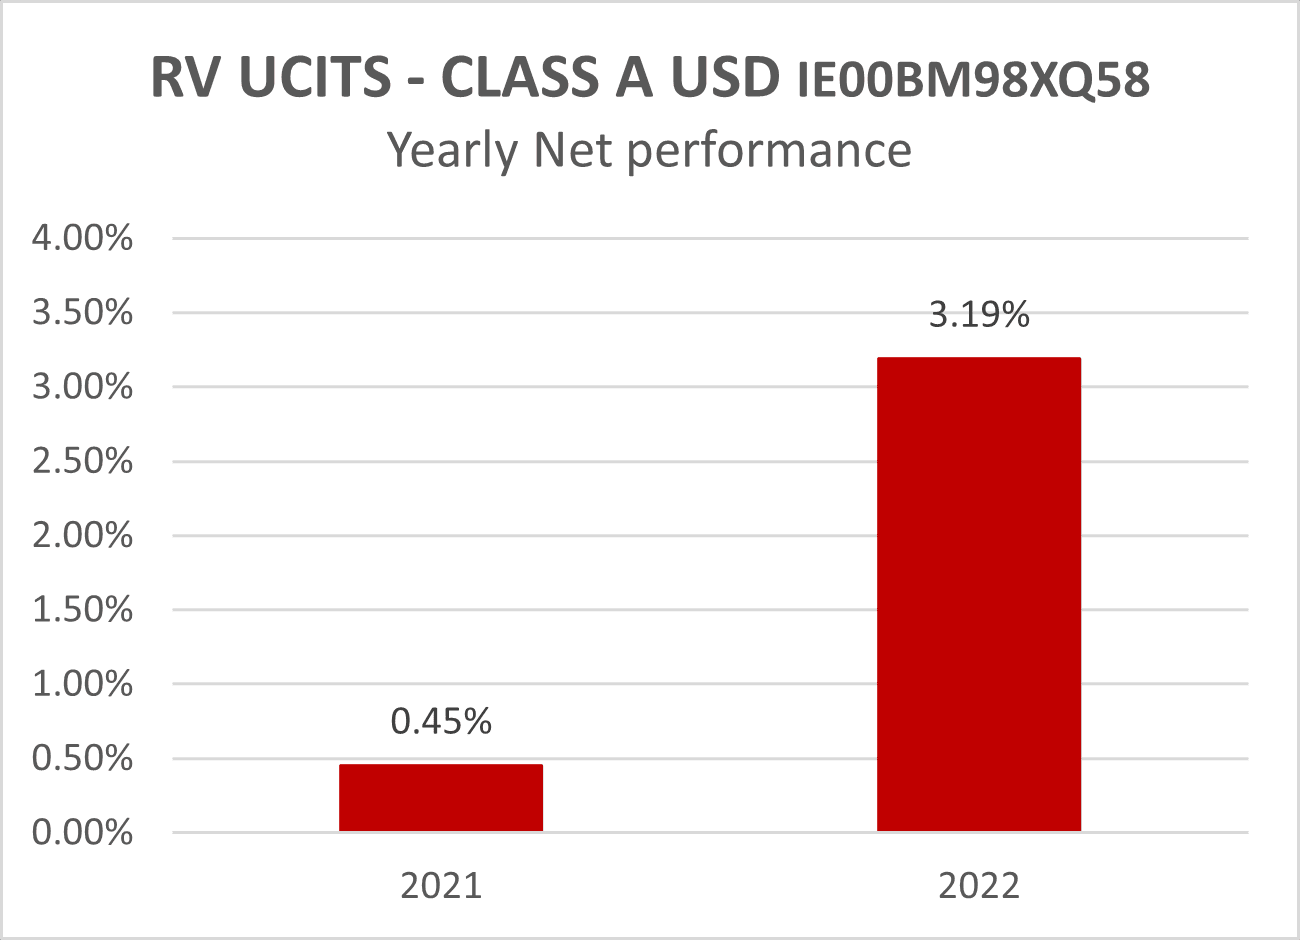 RV UCITS - CLASS A USD IE00BM98XQ58 - Yearly Net performance